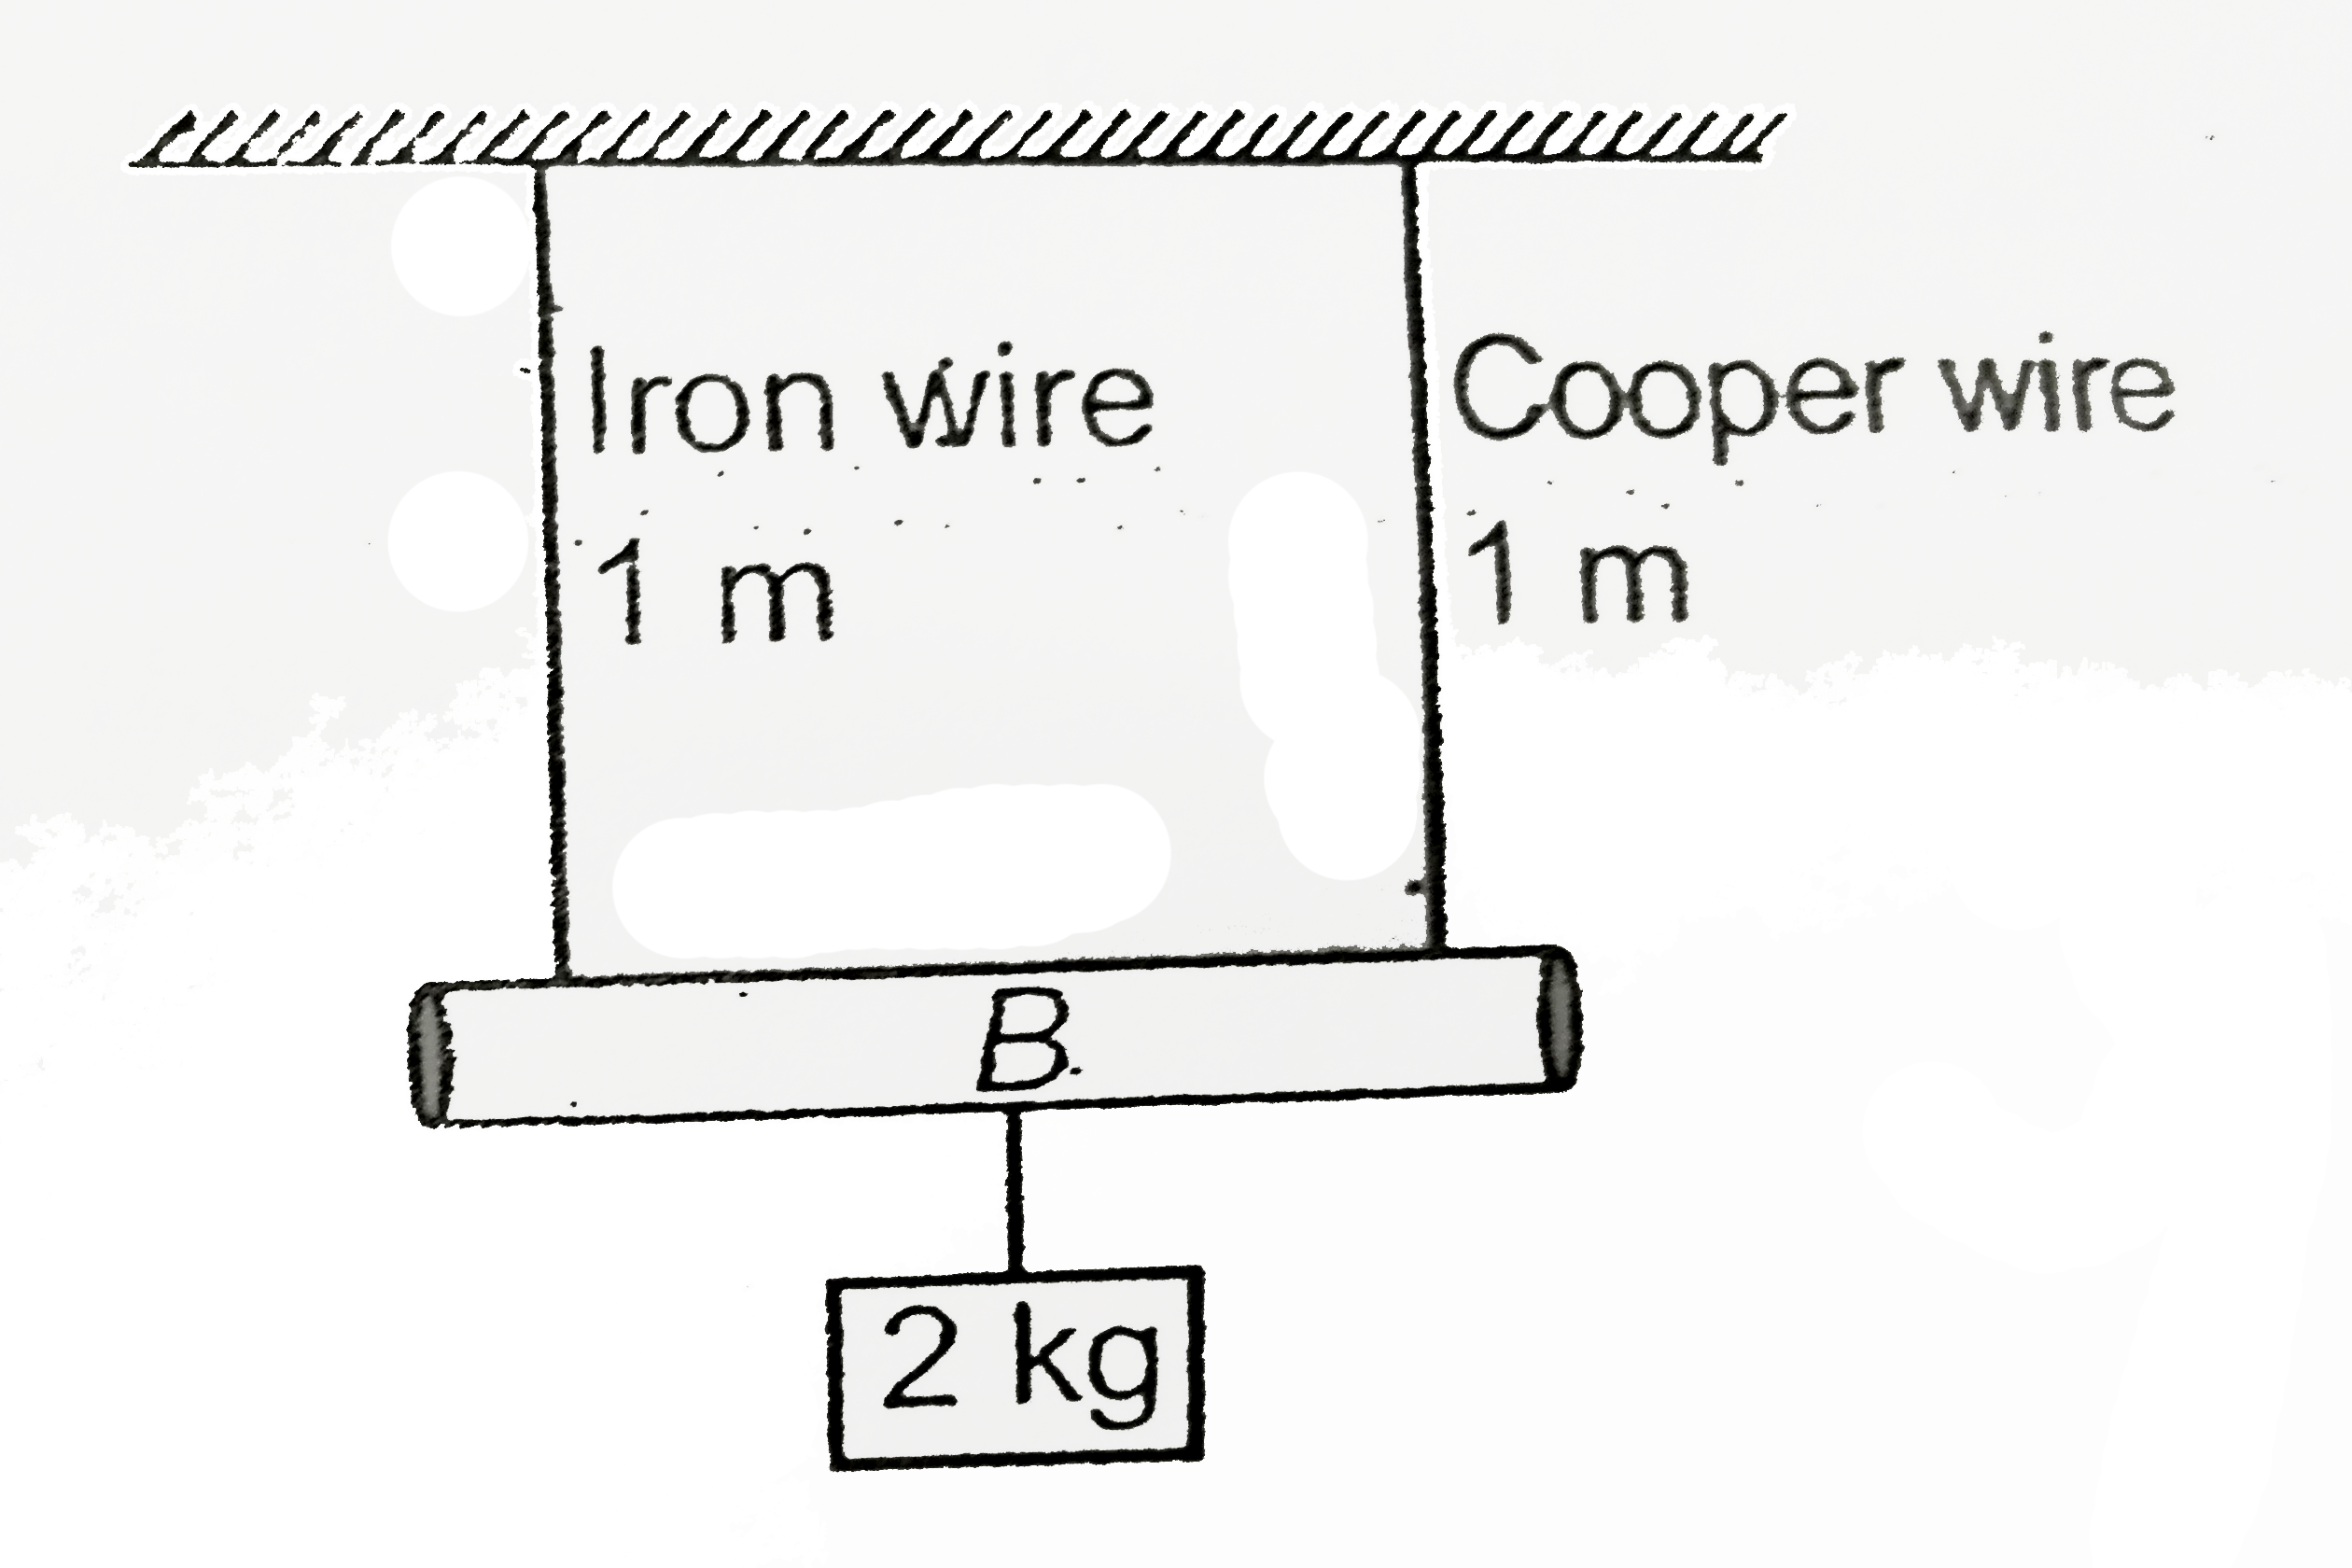 An iron rod B of length 1 m and mass 1 kg is suspended with help of two wires as shwon in figure. The area of cross-section of iron wire is 0.3 cm^(2) and of copper wire is 0.6cm^(2).      At what distance from iron wire a weight can be hung to produce equal stress in wires?